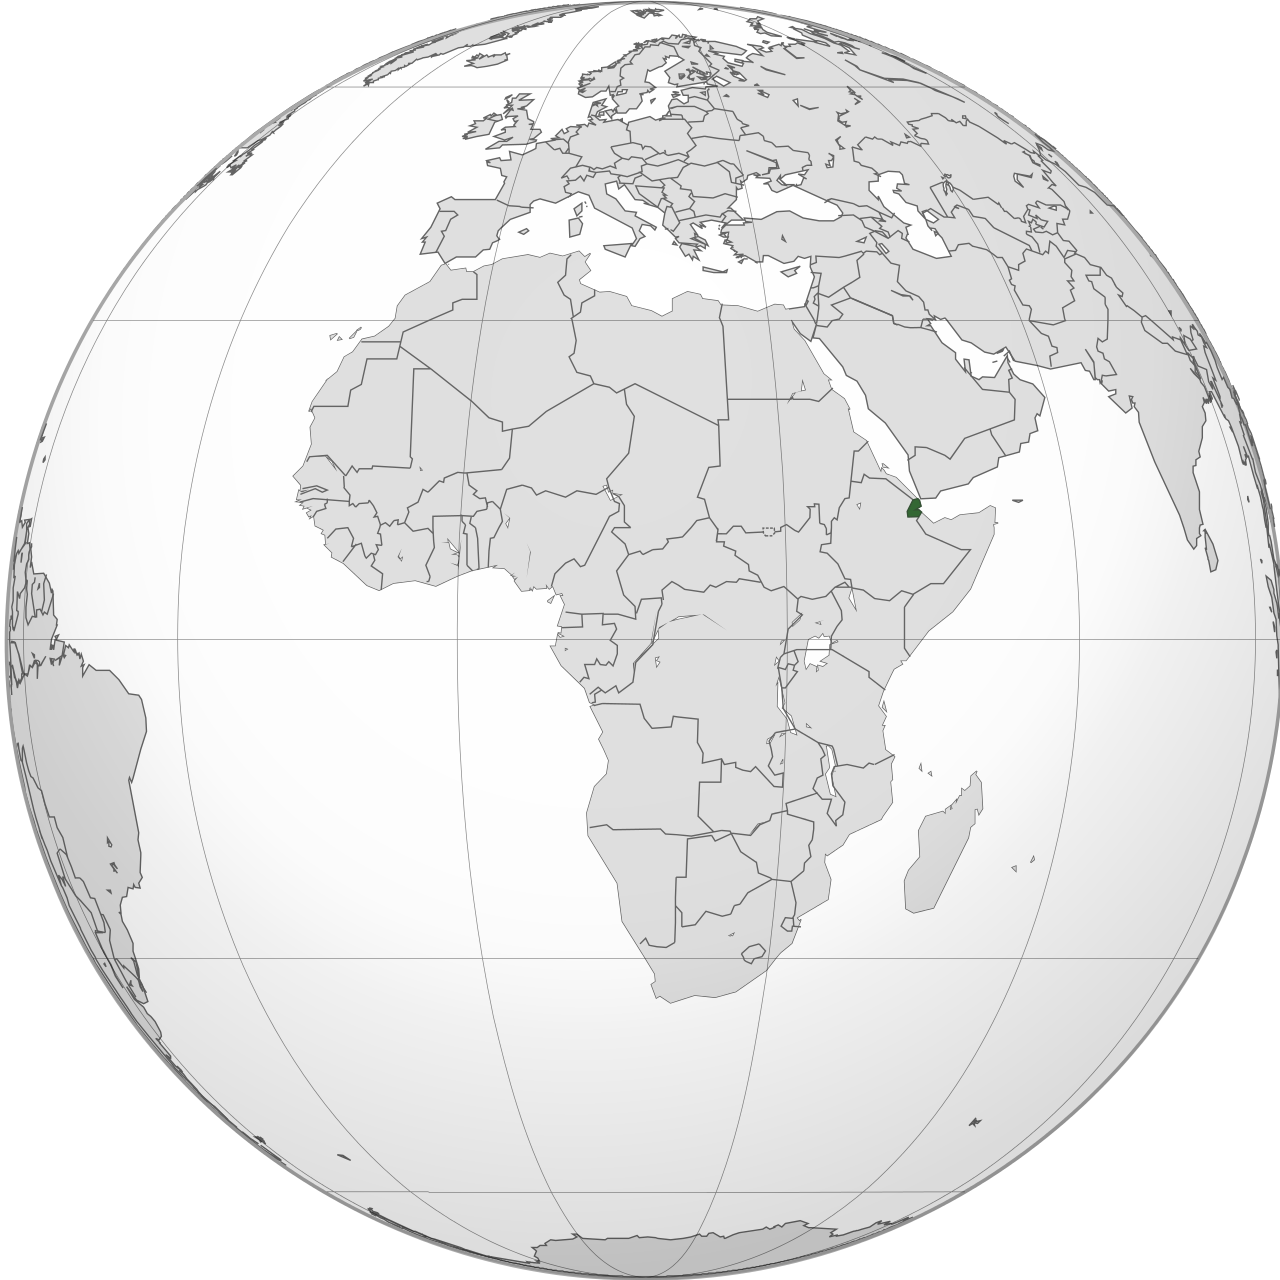 Djibouti_(orthographic_projection).svg.png